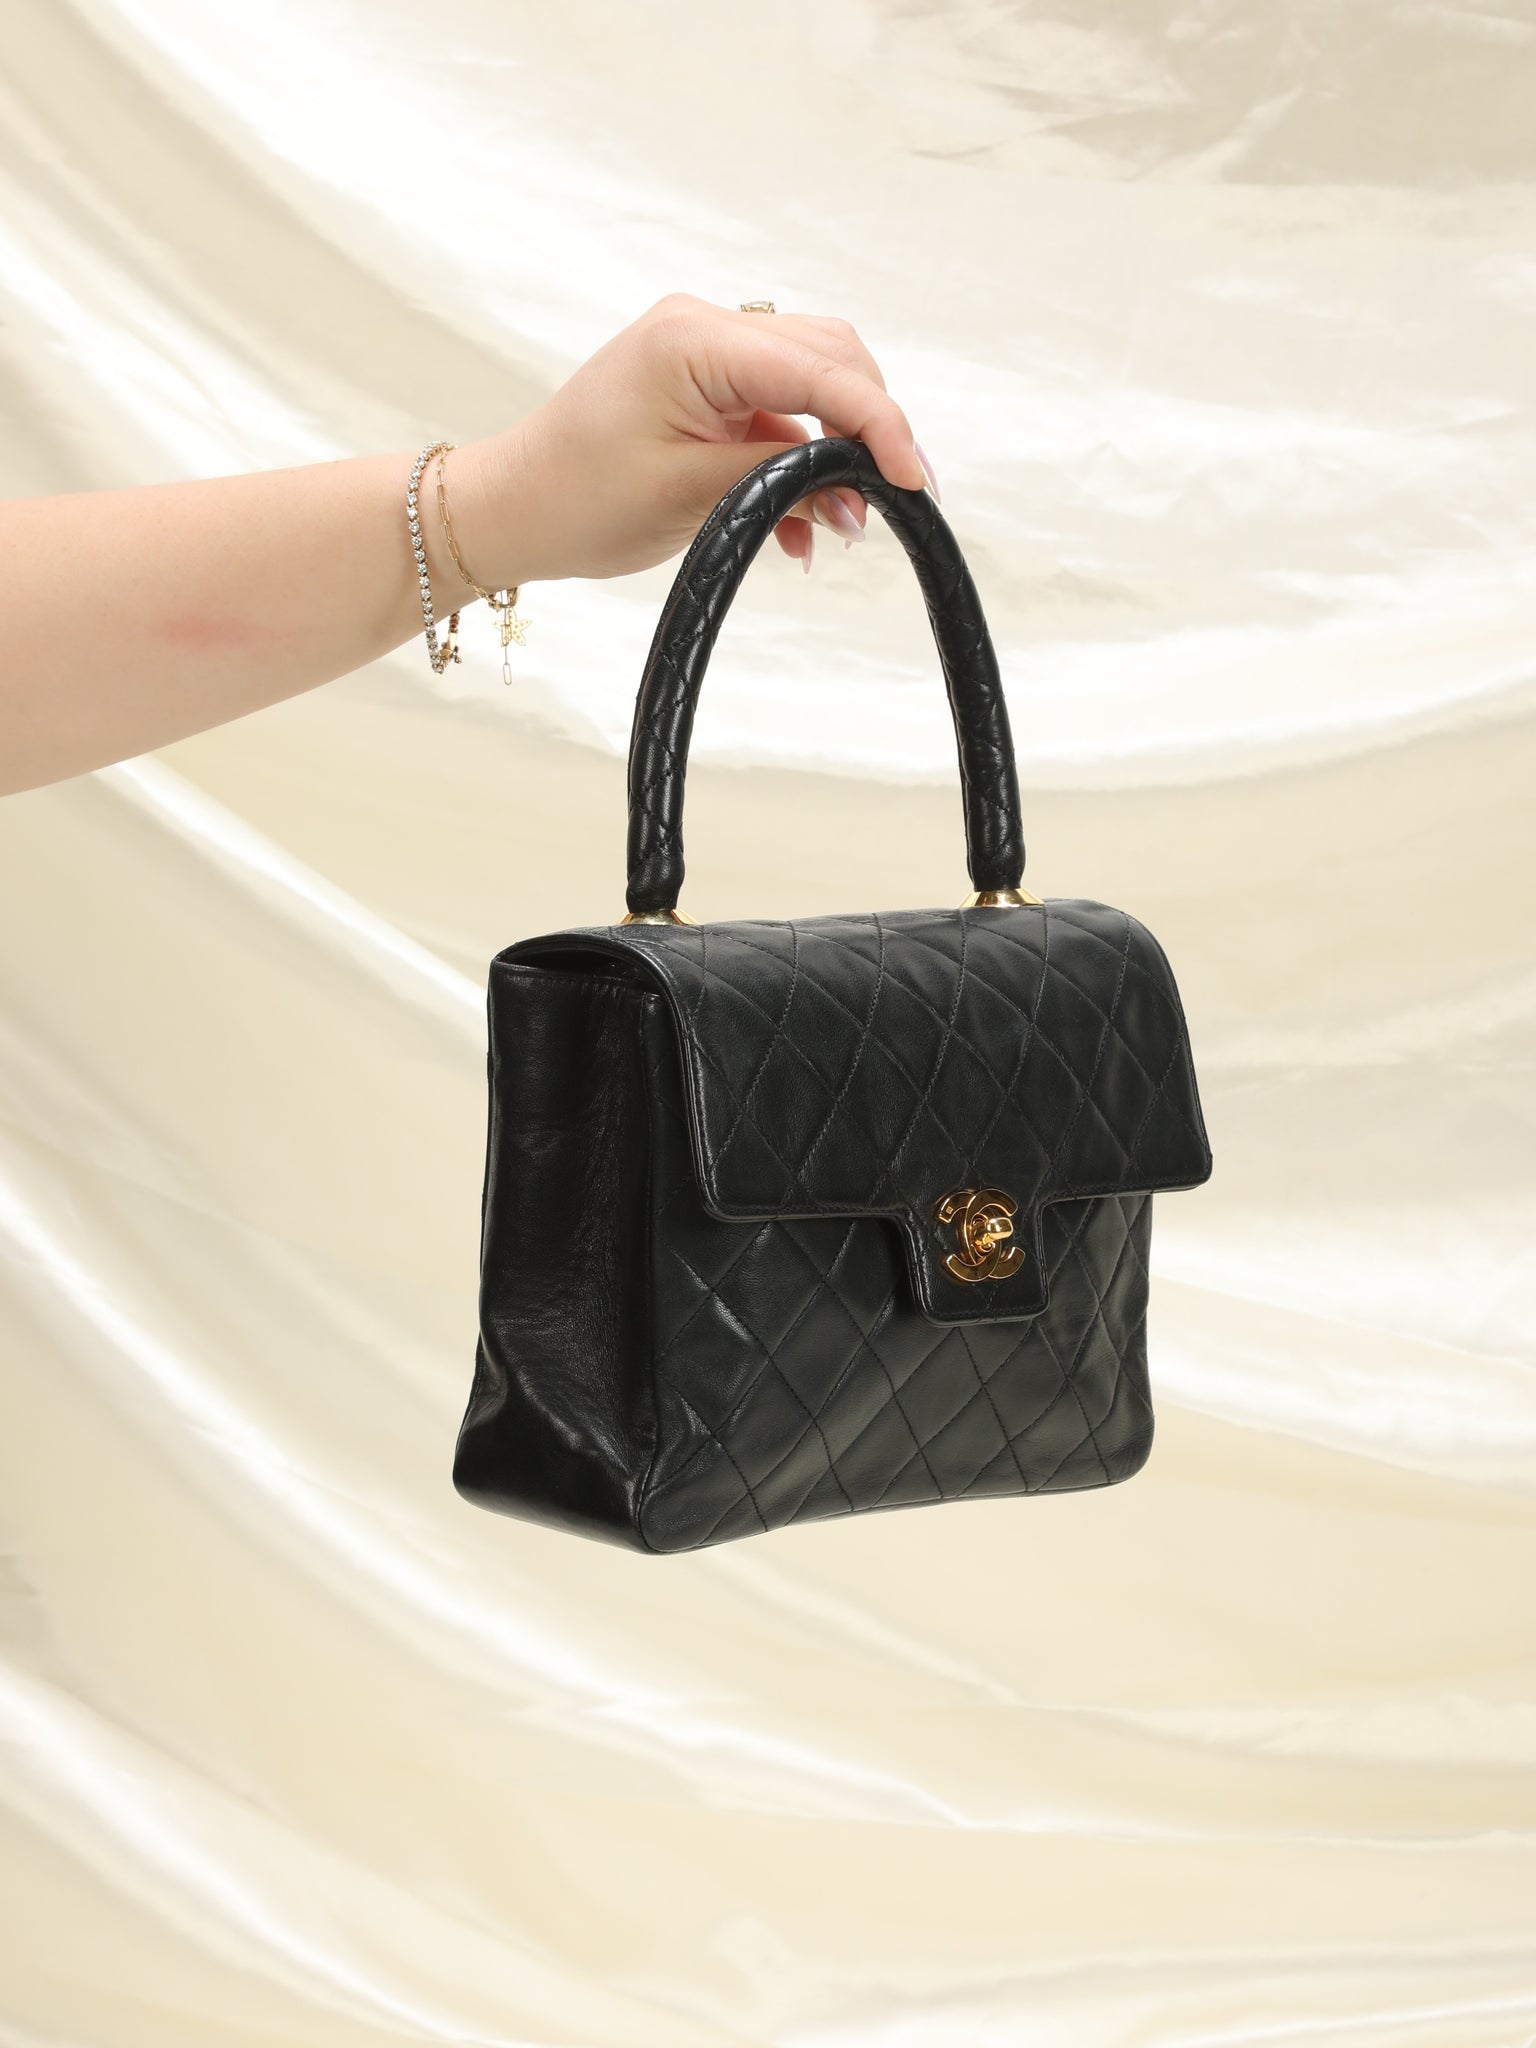 Chanel Vintage Quilted Kelly Top Handle Bag Lambskin Black Small Bag  eBay